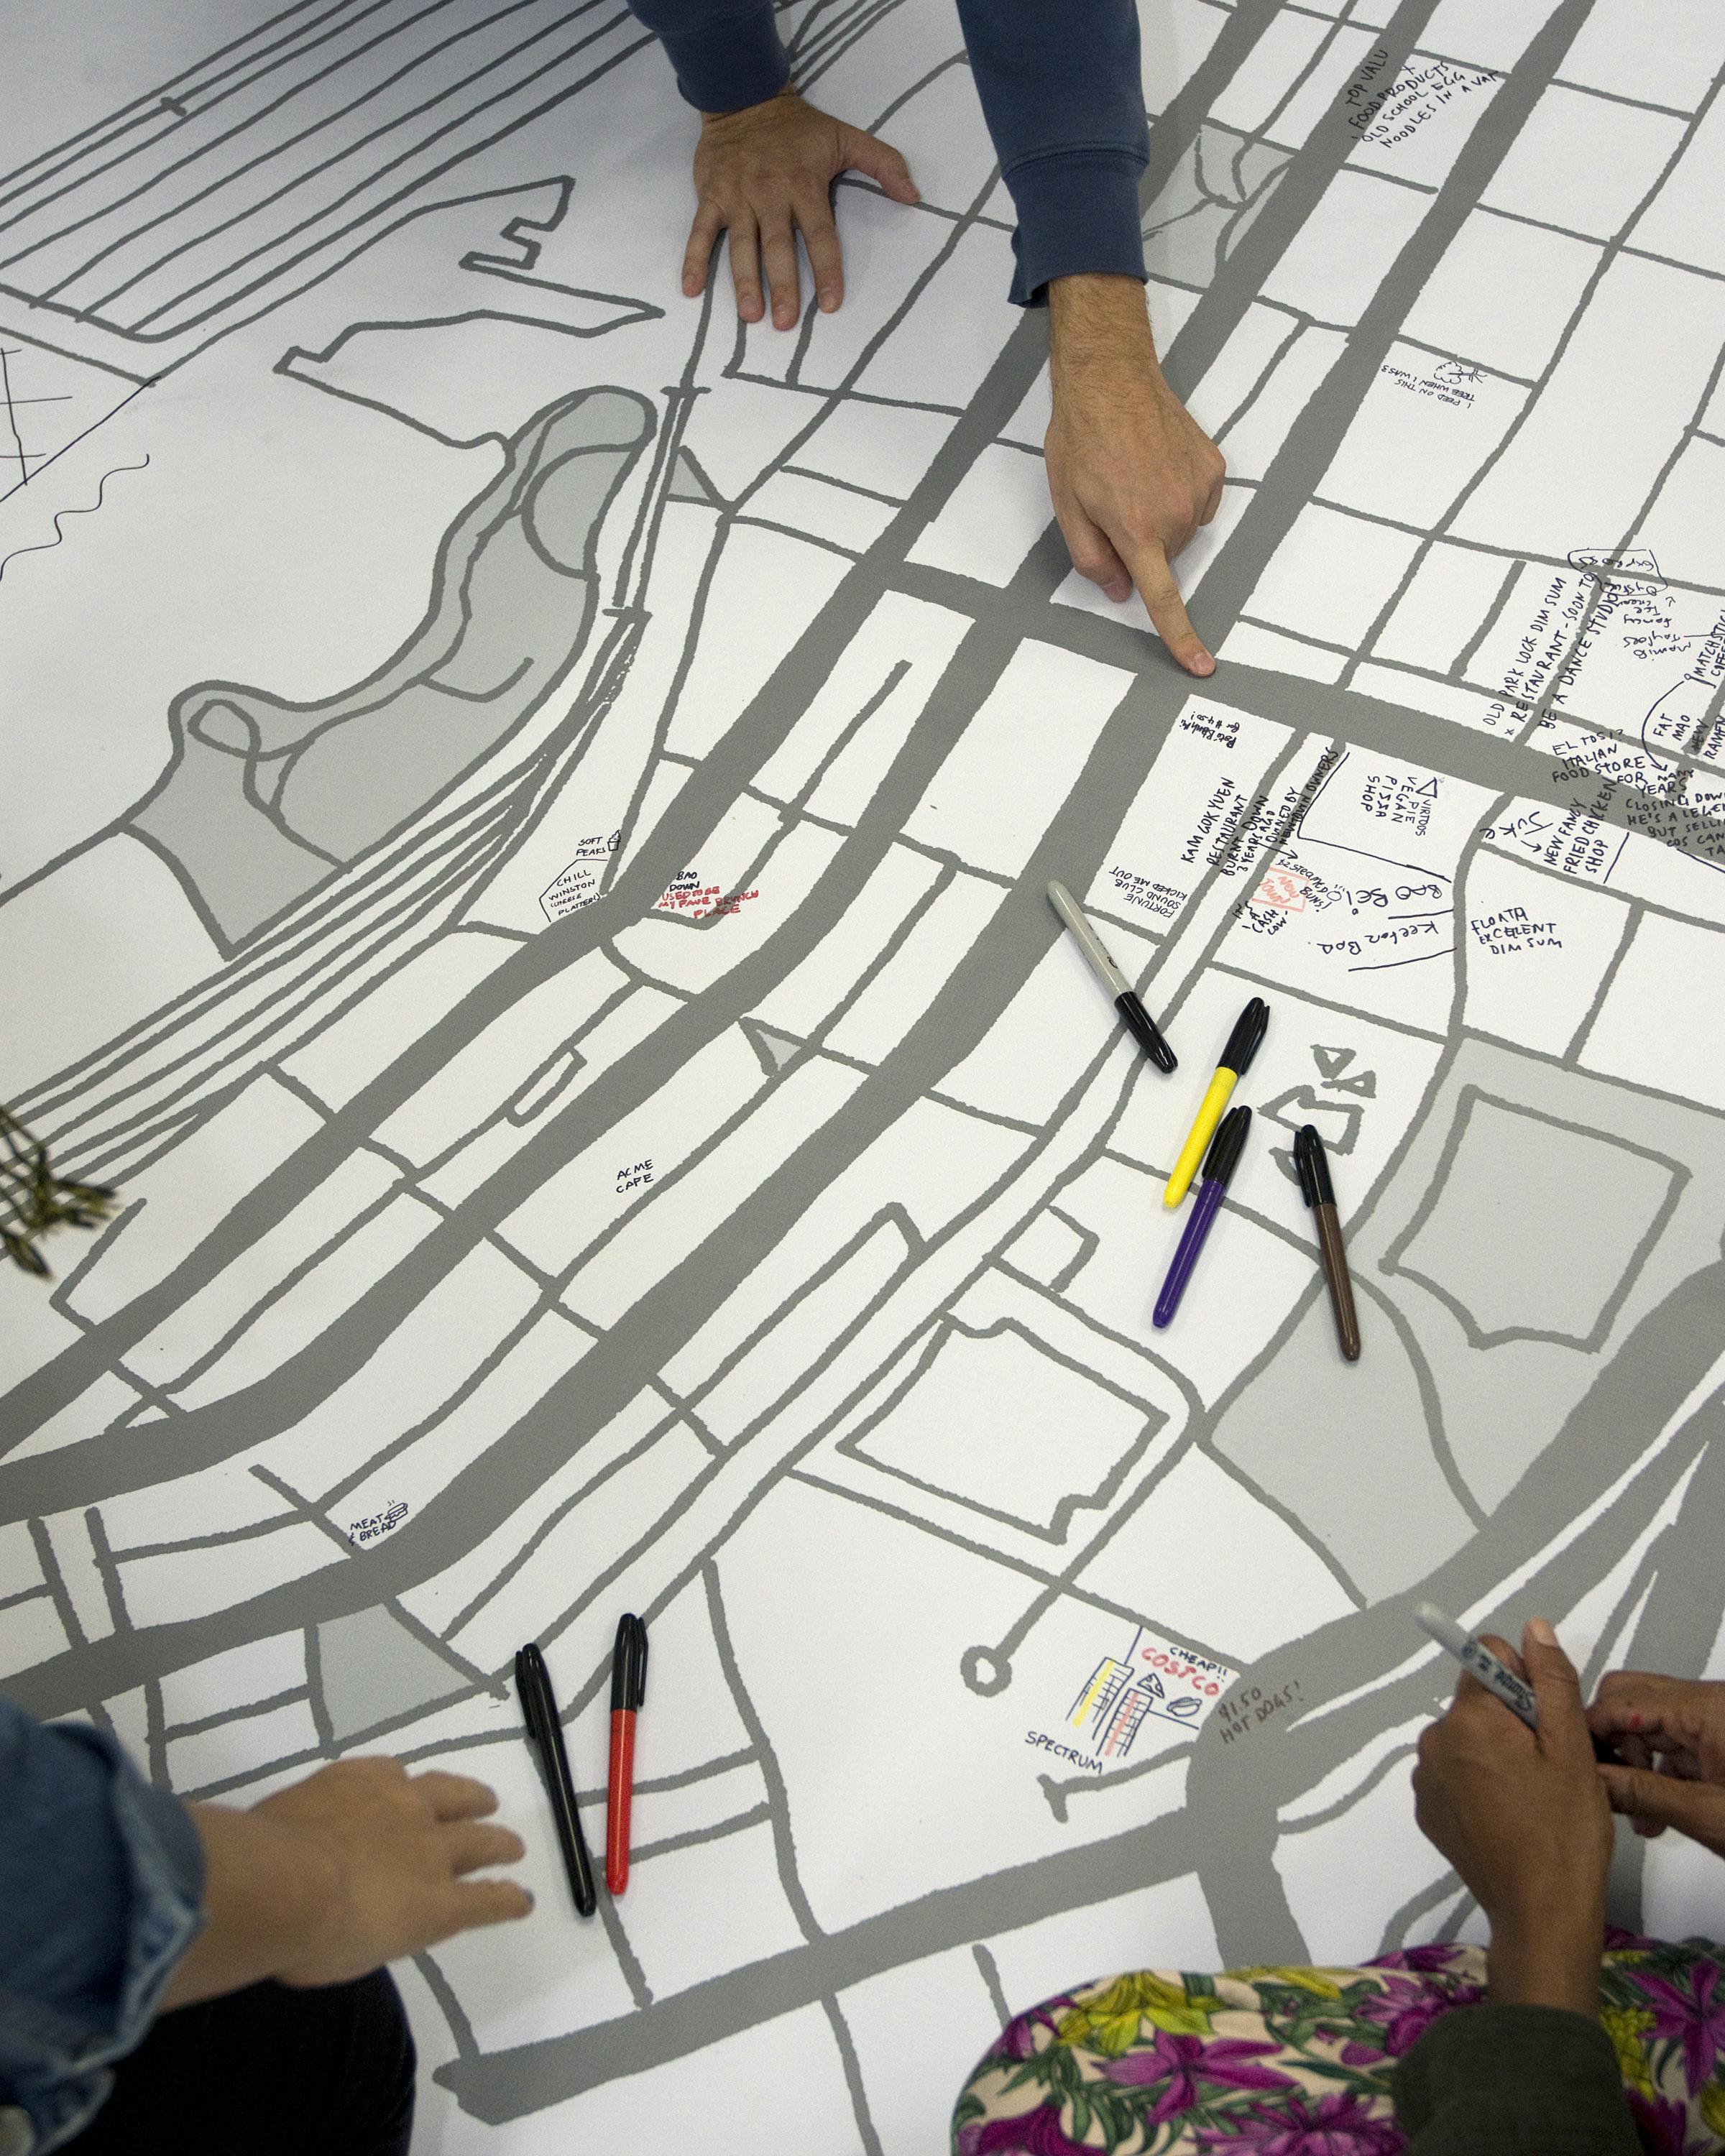 A large black and white map covers the floor. Various coloured markers are scattered across the surface and a person is pointing to an intersection on the map. 